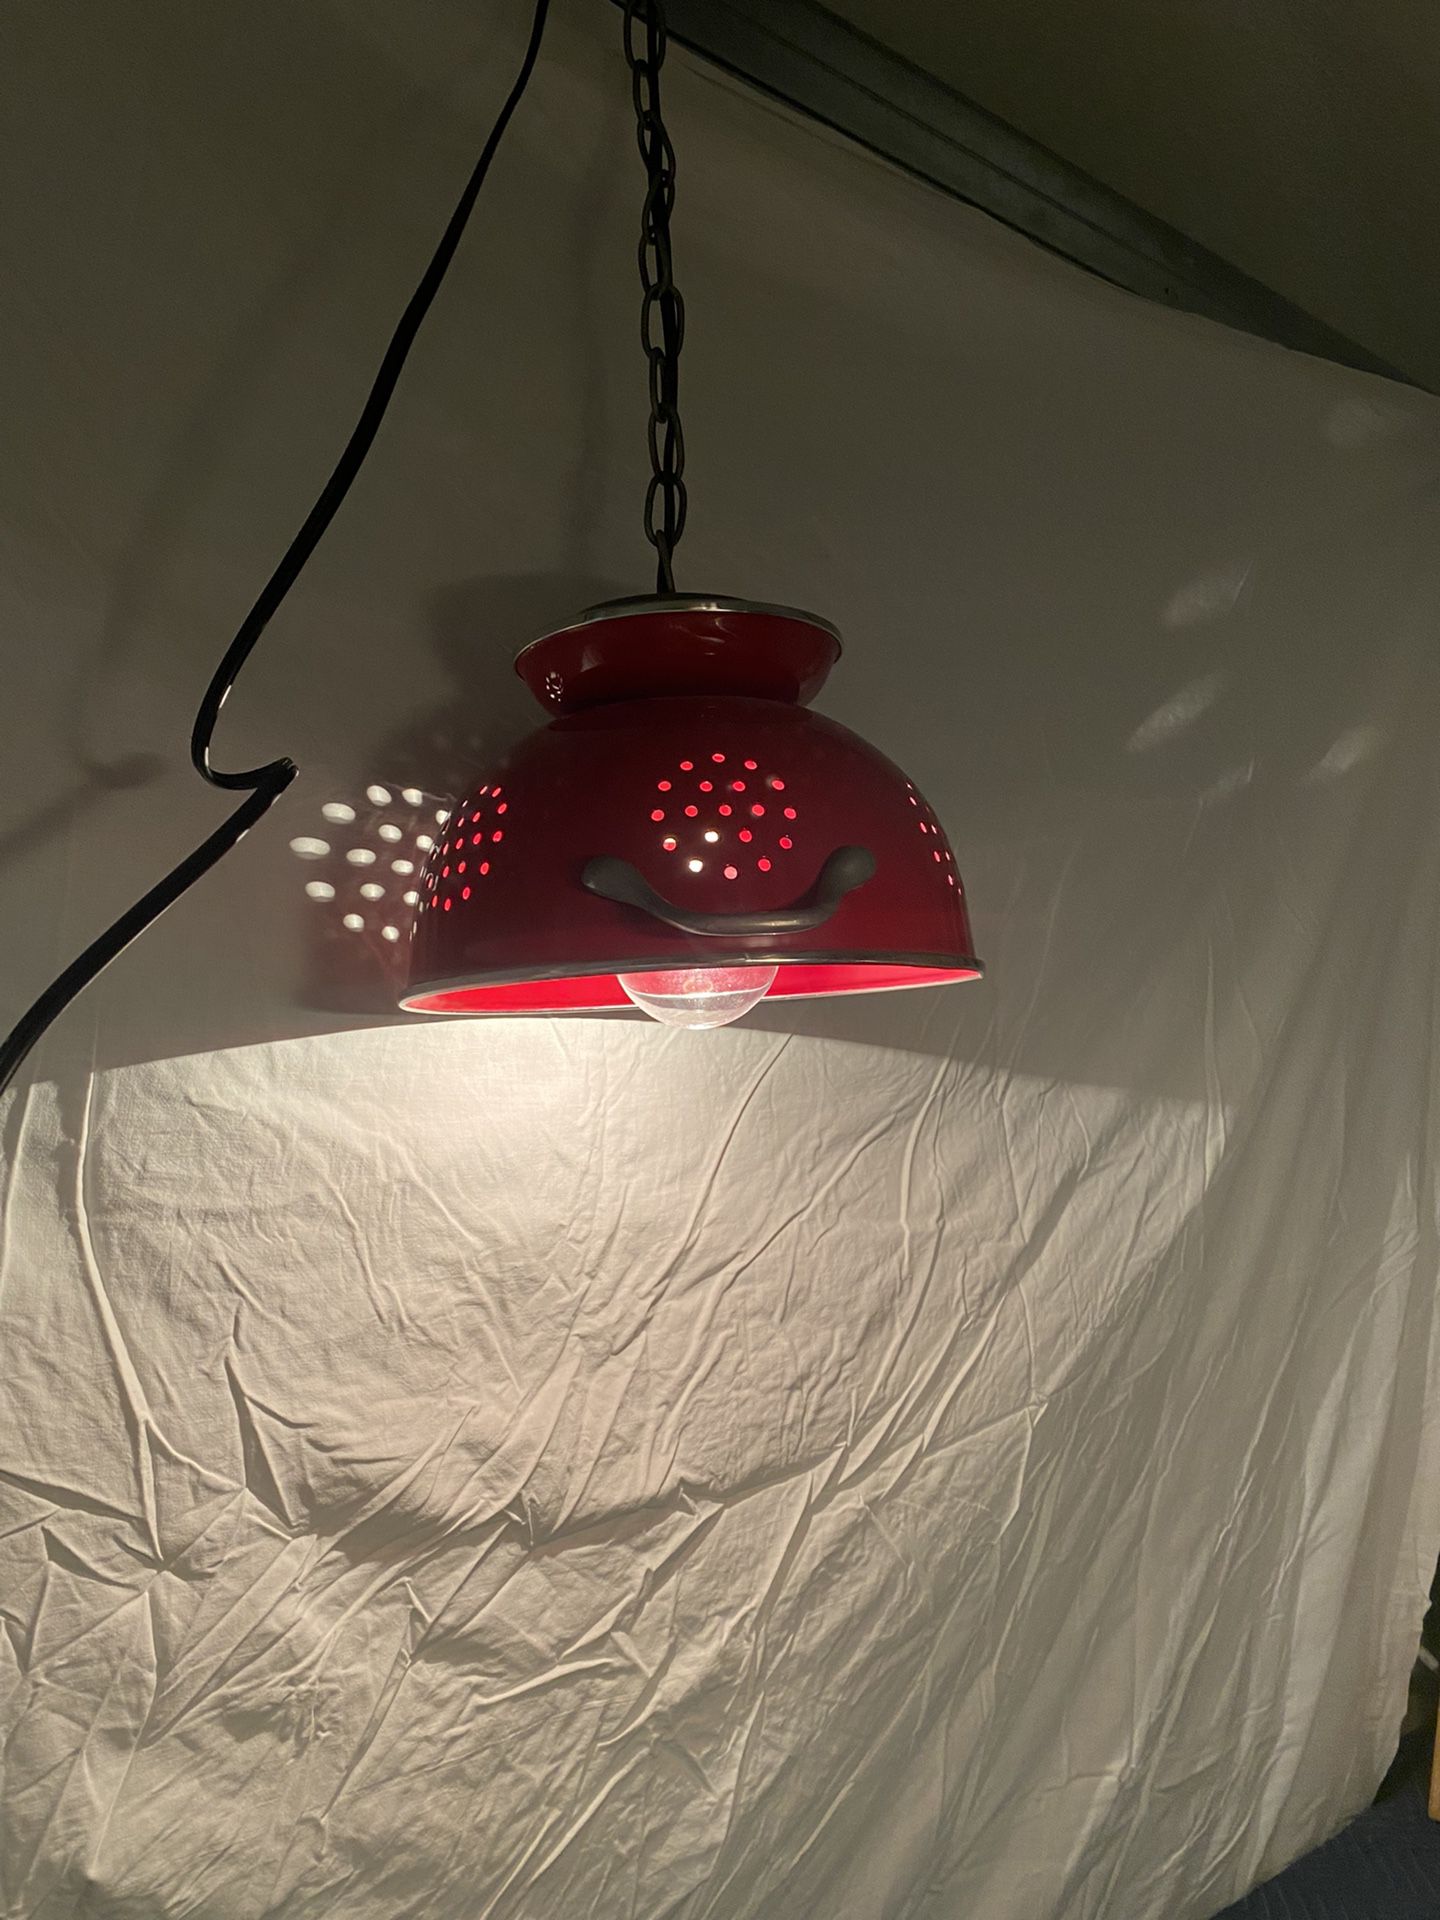 Vintage Colander Up cycled Into A Chandelier